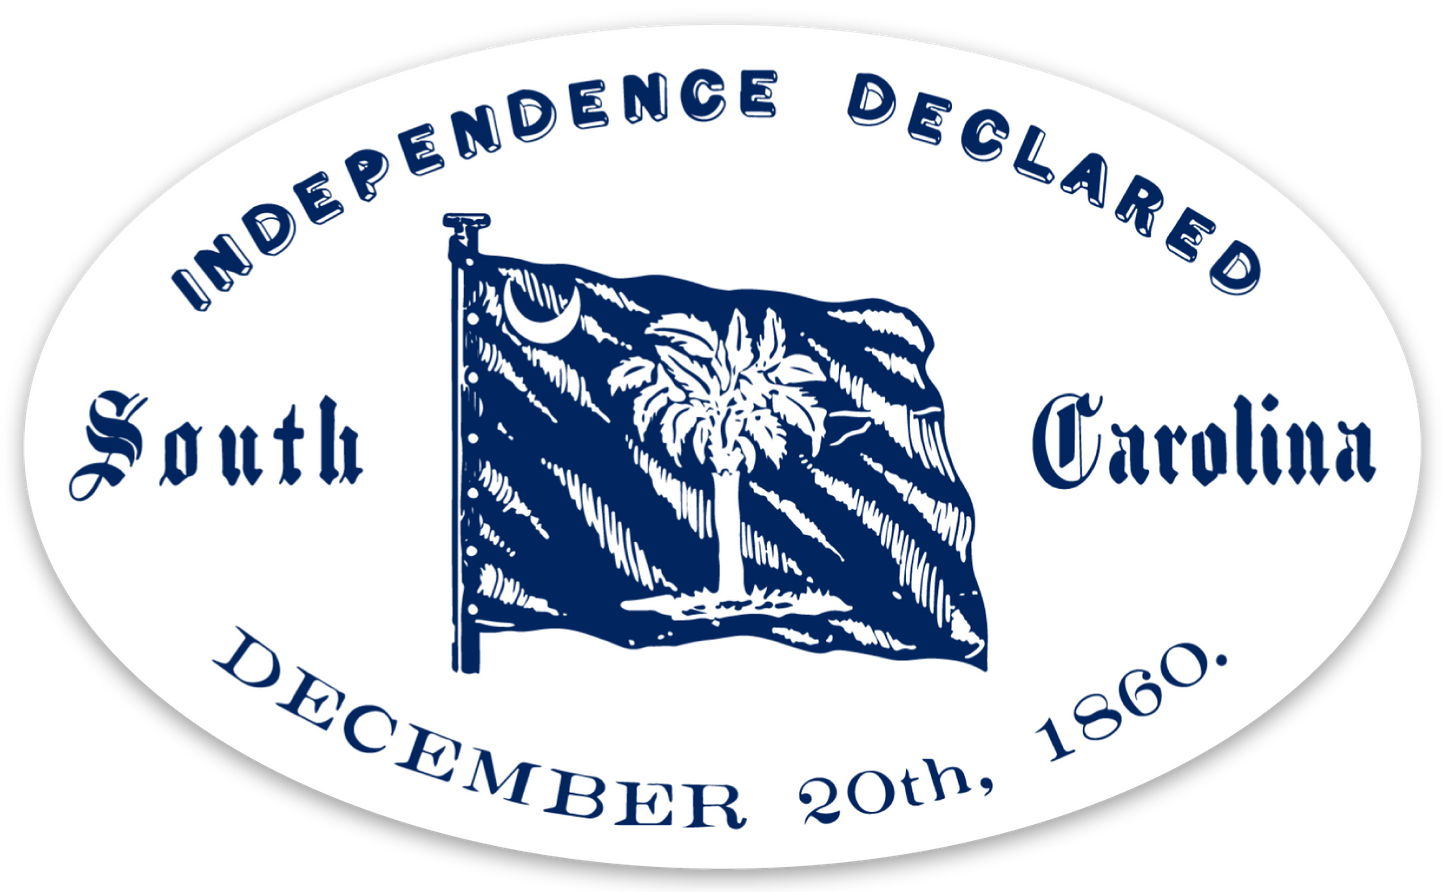 Independence Declared! South Carolina Stickers